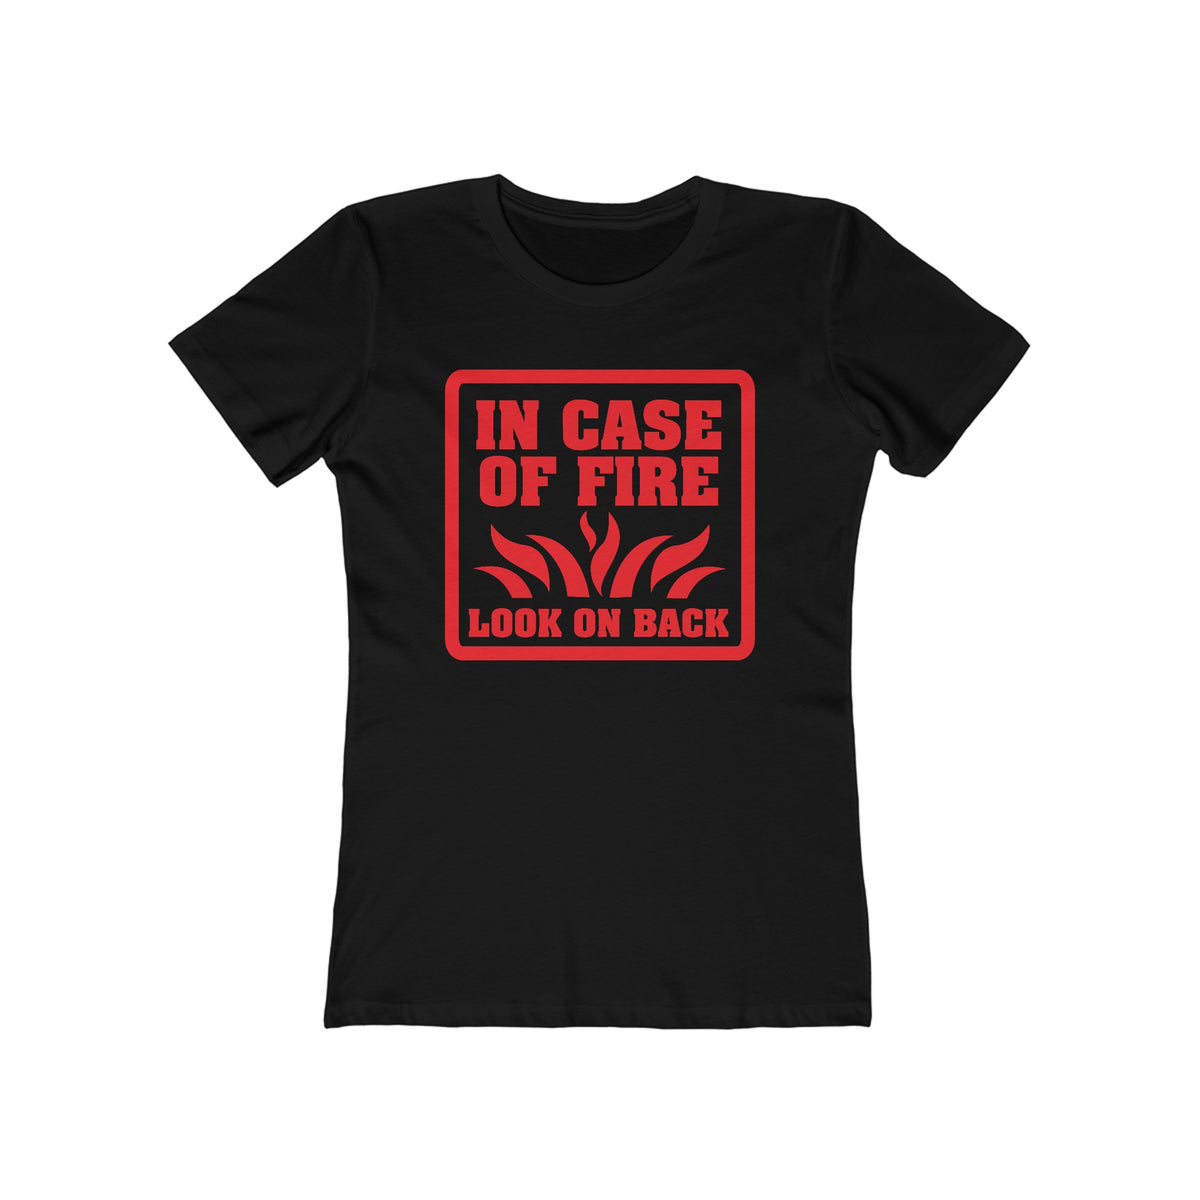 In Case Of Fire Look On Back - I Said In Case Of Fire Dumbass - Women’s T-Shirt